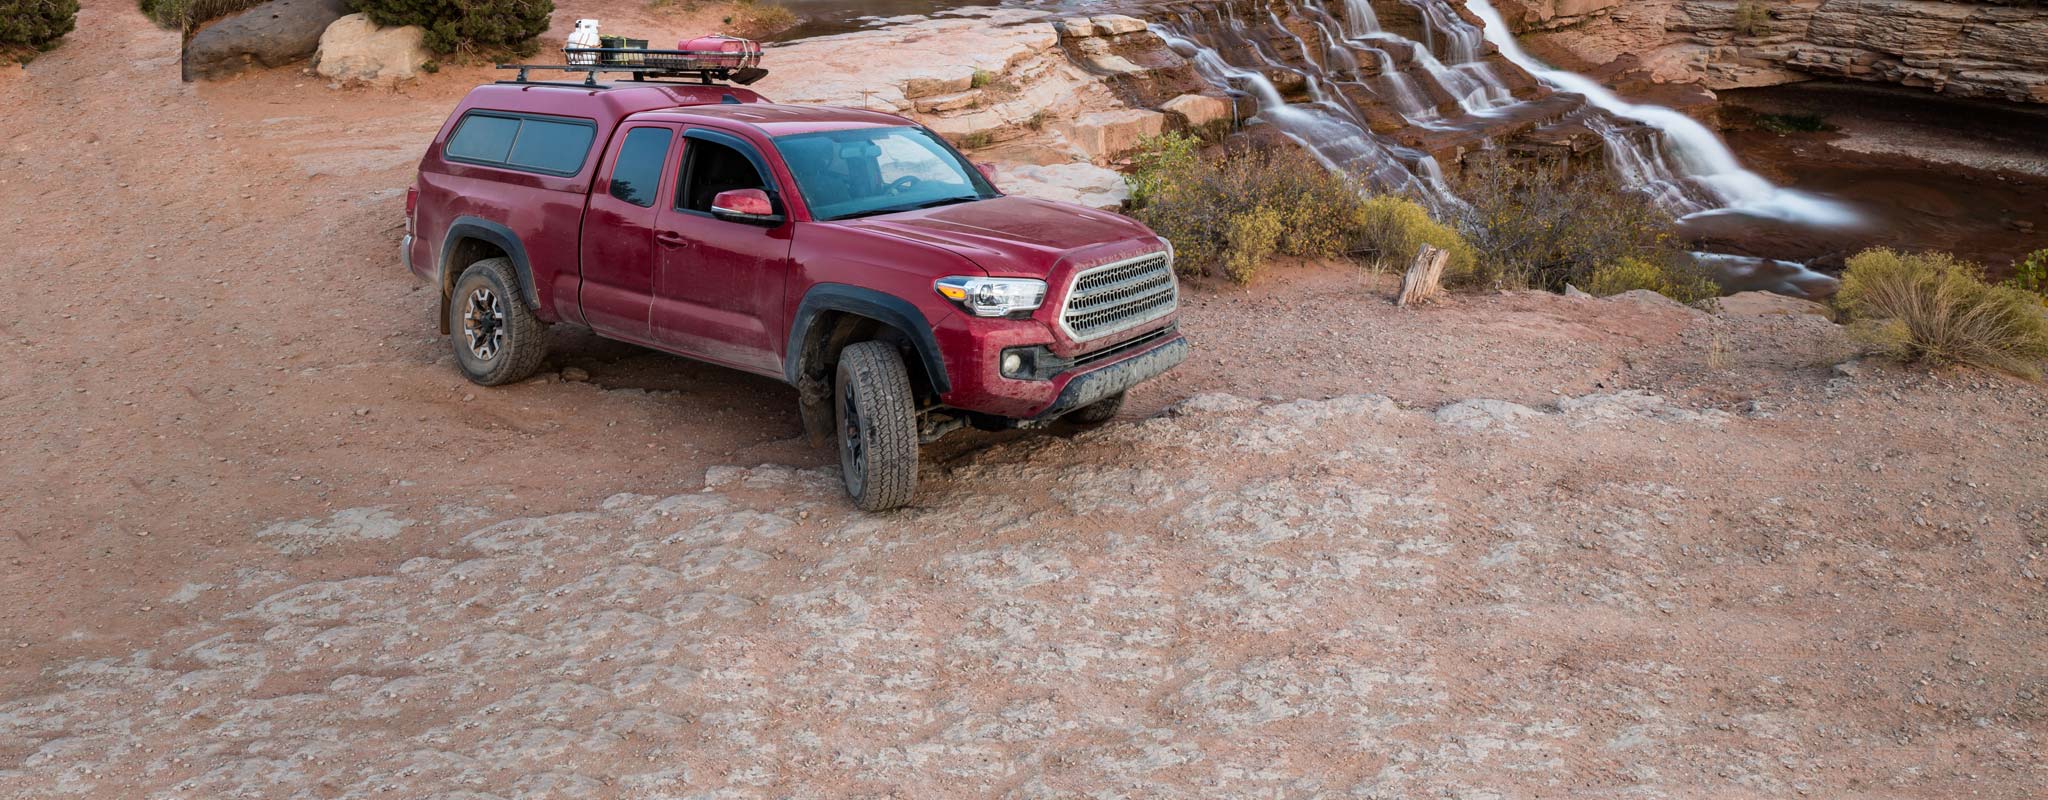 Red pickup with canopy on sandy ground near a waterfall.